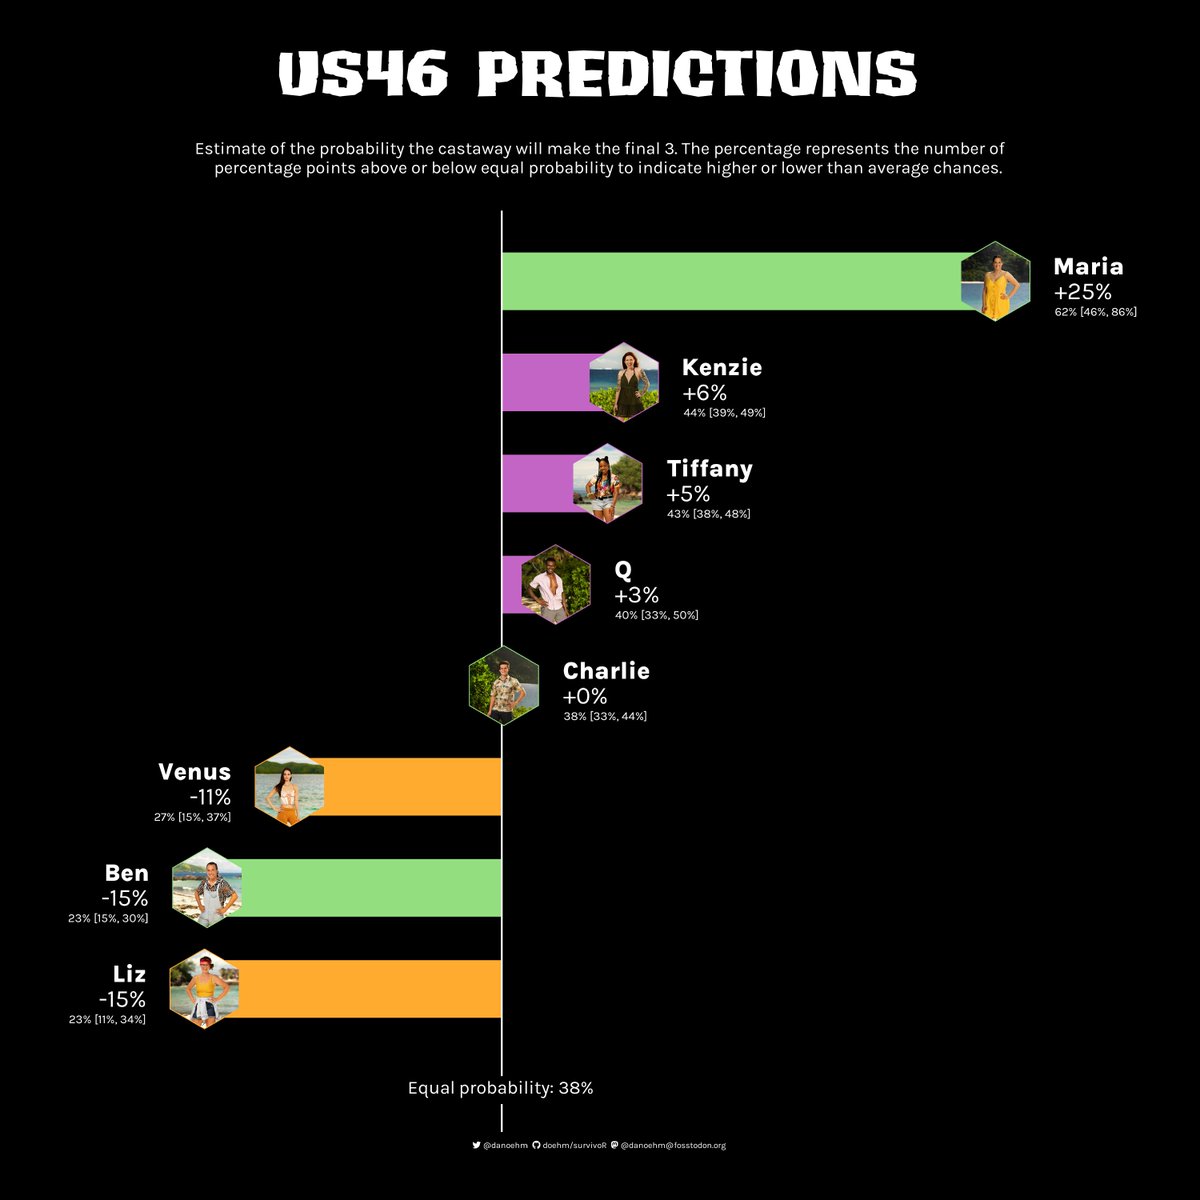 I've updated the predictions for #Survivor46 . Looks like Maria is in a strong position to make the final 3 followed by Kenzie and Tiff. Q's just above average but the data doesn't capture the chaos. Who knows, he could make it to f3 for that reason.